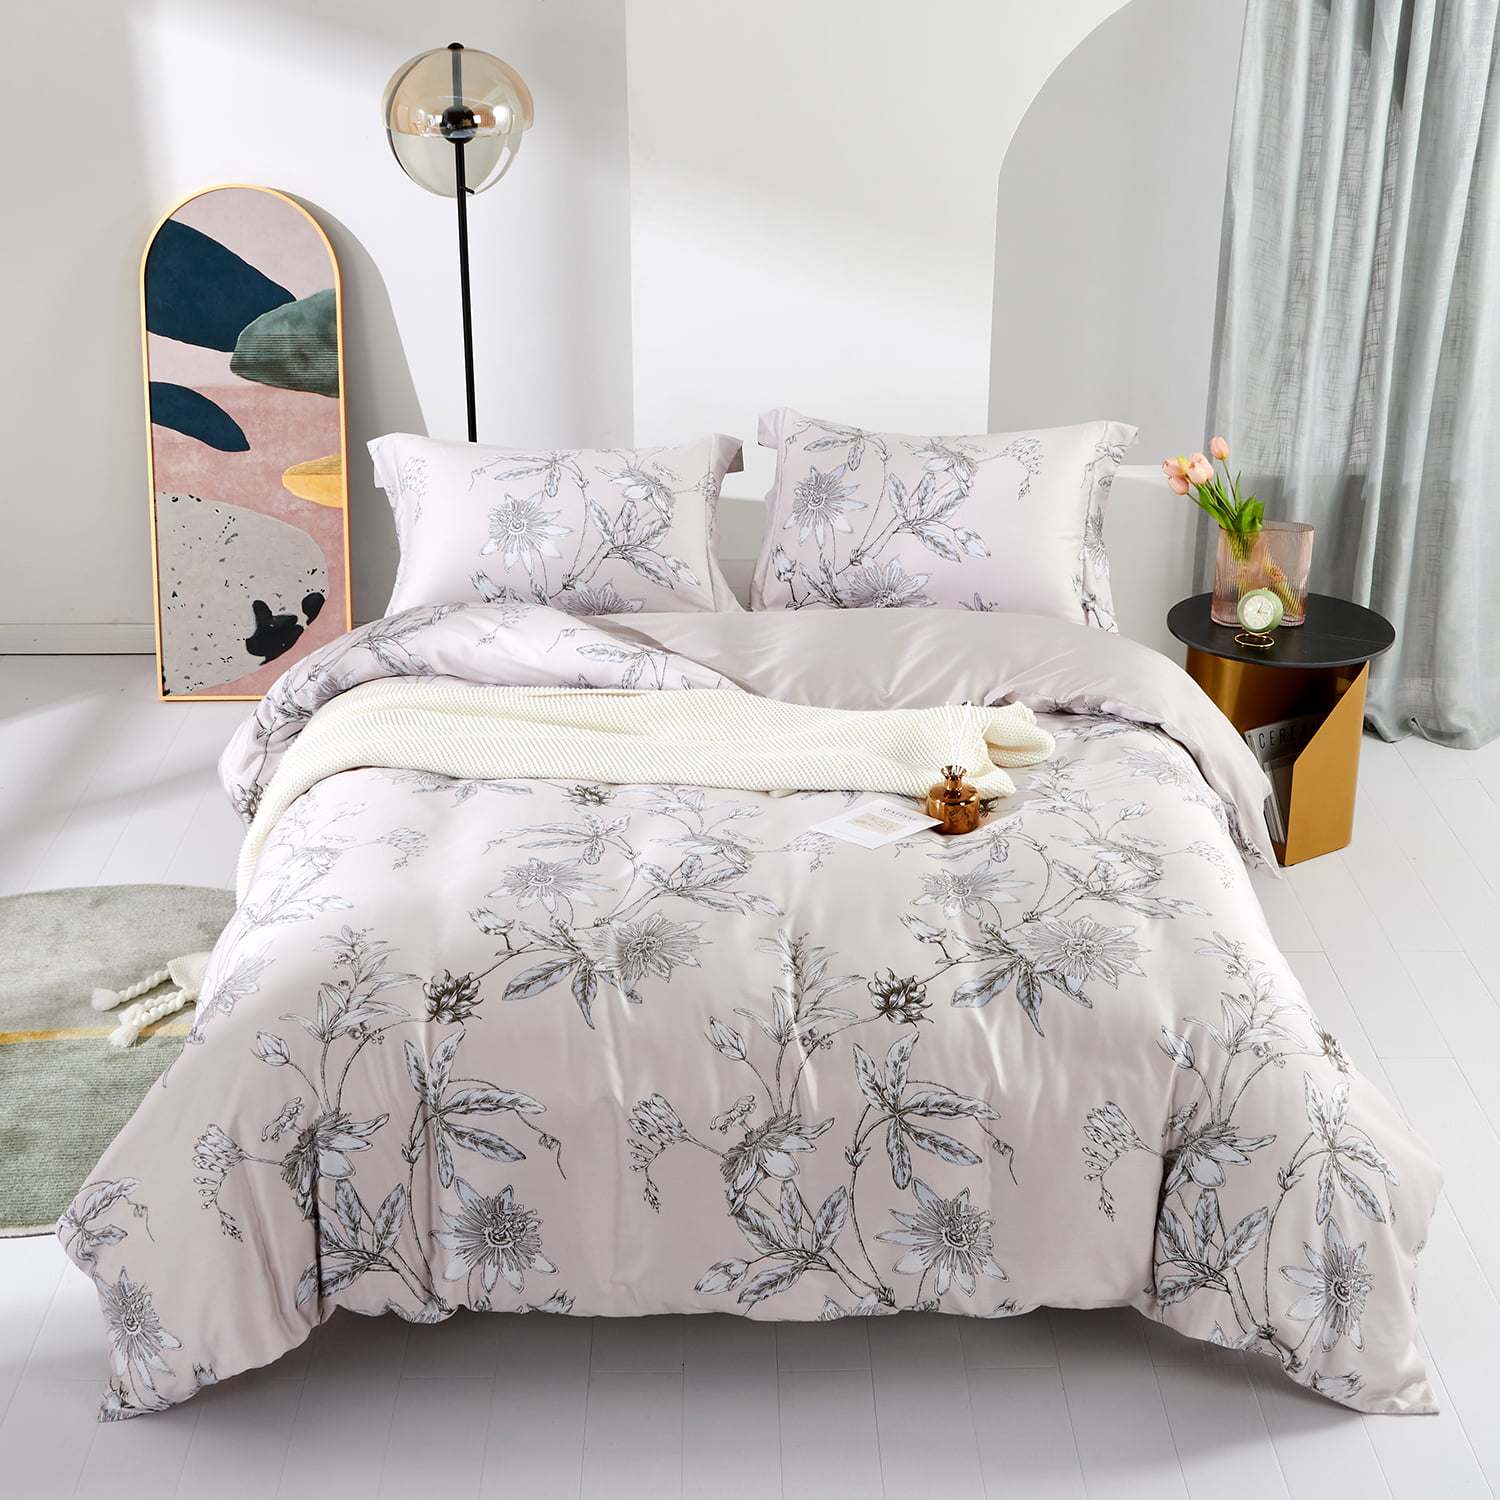 Fabulous 100% Egyptian Cotton Printed Duvet Cover Sets Bedding Sets All Sizes 